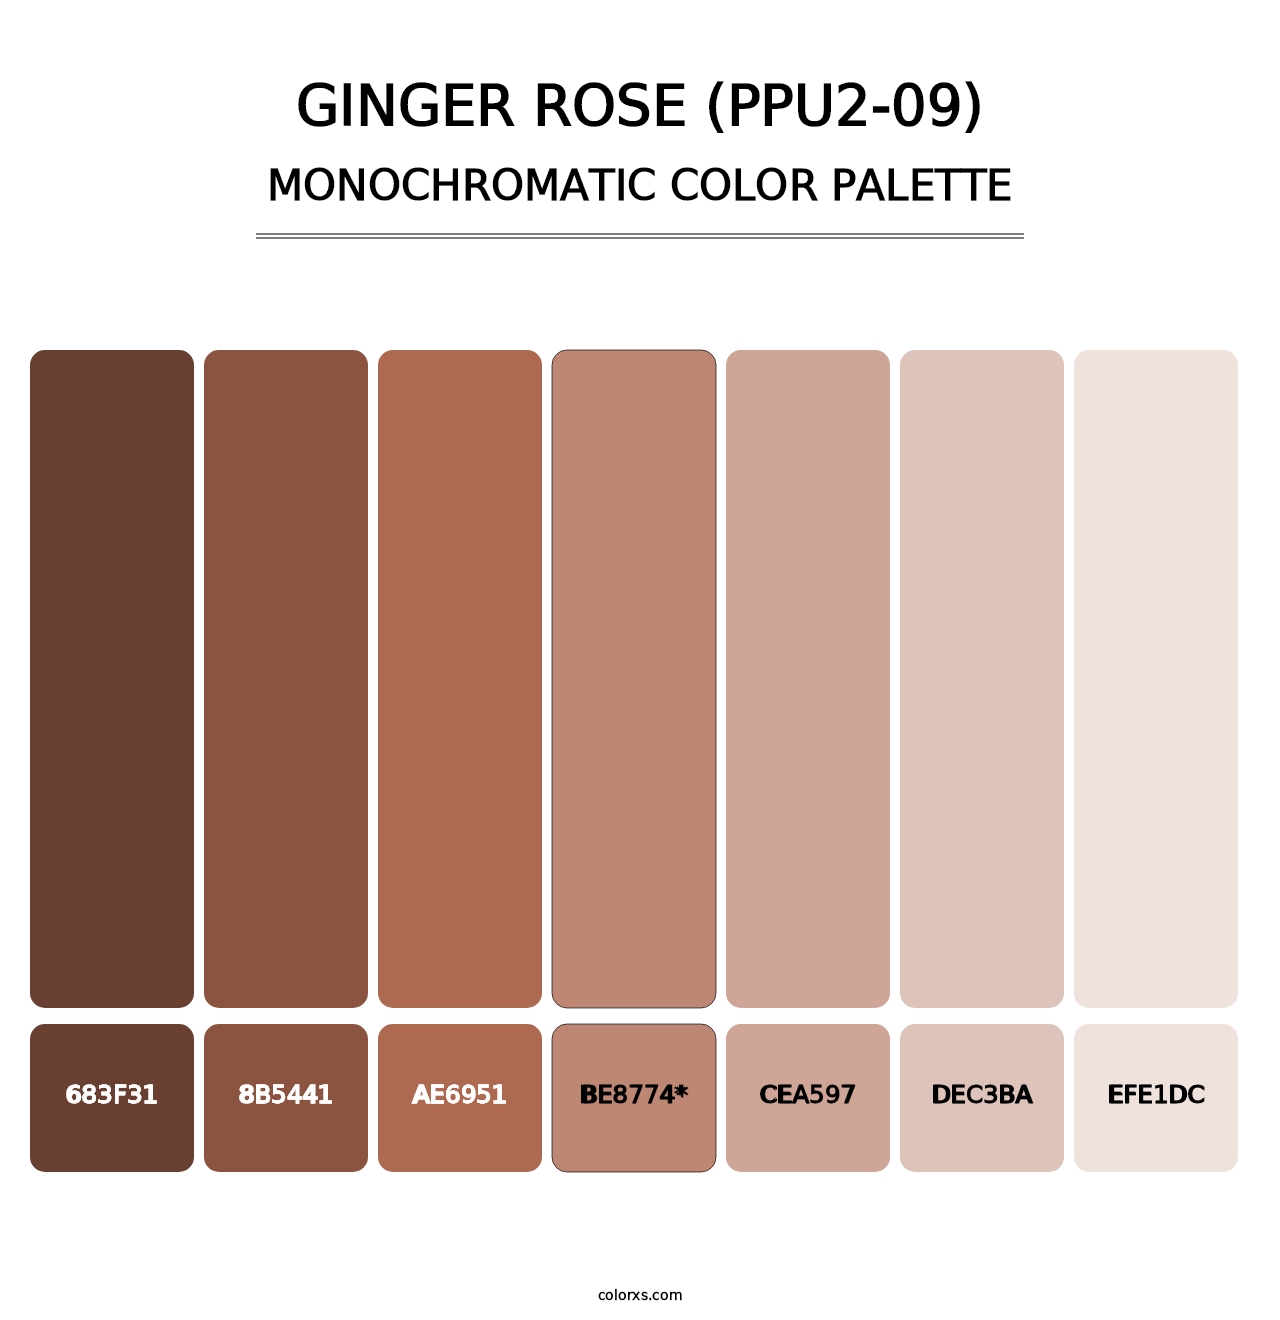 Ginger Rose (PPU2-09) - Monochromatic Color Palette